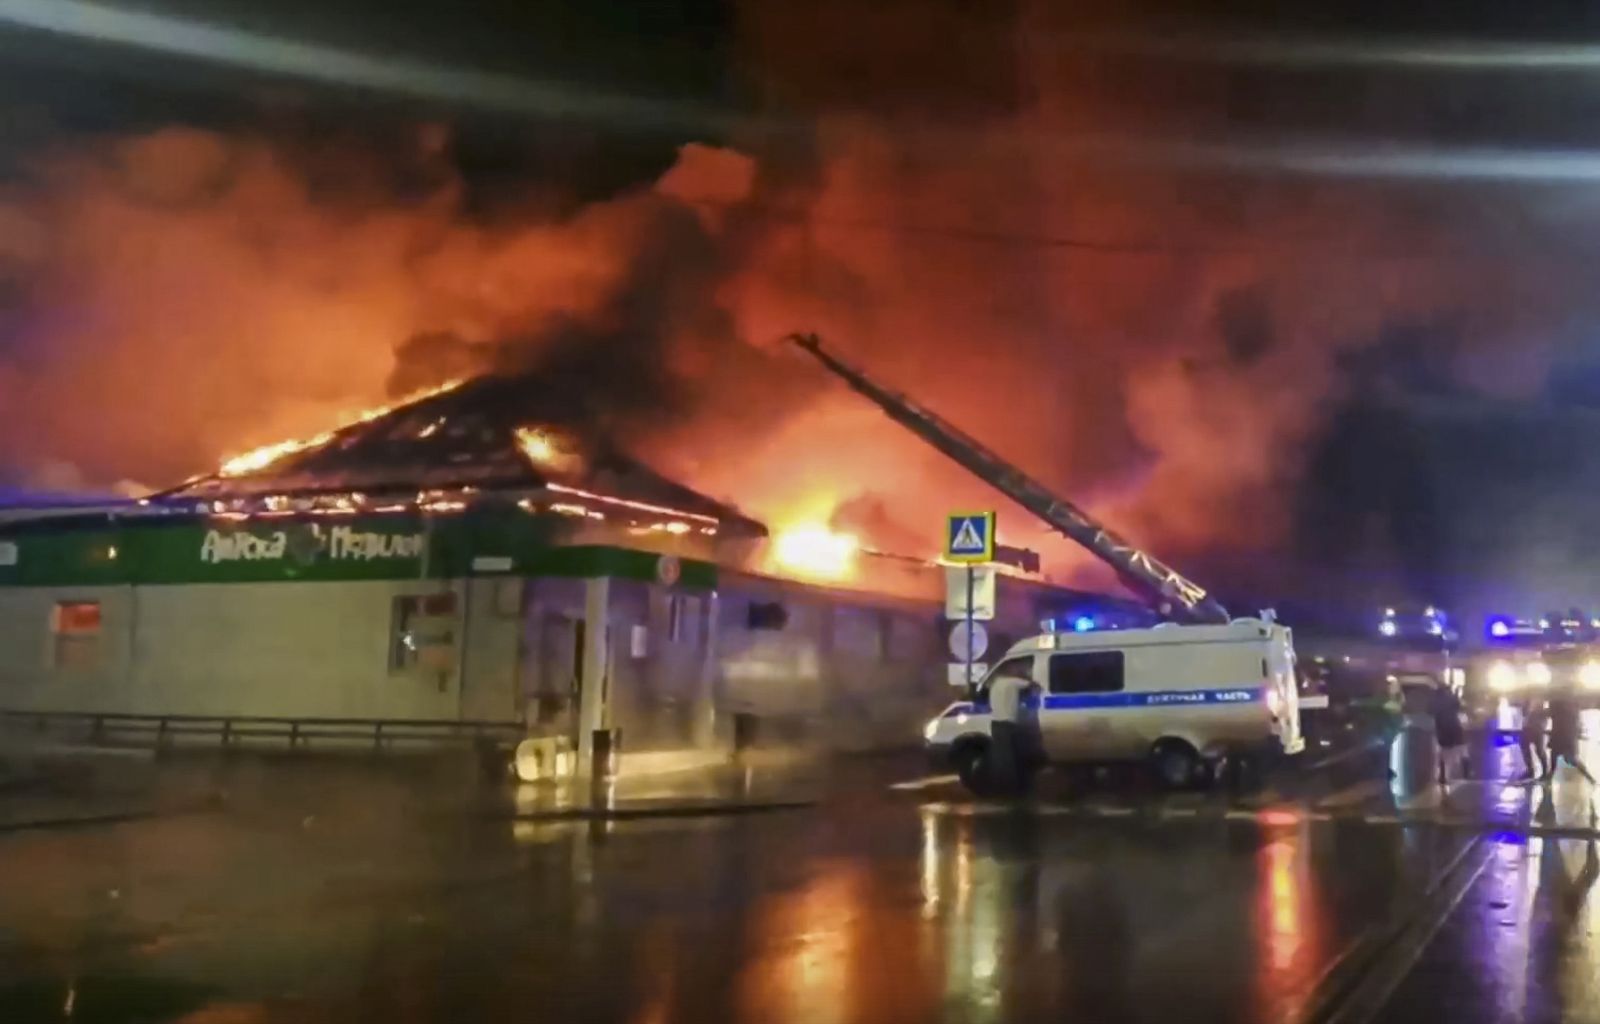 epa10287441 A handout photo taken from a video made available by the Russian Emergency Ministry Press Service shows firefighters try to extinguish a fire at 'Polygon' cafe in Kostroma, Russia, 05 November 2022. The fire claimed the lives of at least 15 people, according to emergency services on the site.  EPA/RUSSIAN EMERGENCIES MINISTRY HANDOUT BEST QUALITY AVAILABLE/HANDOUT EDITORIAL USE ONLY/NO SALES HANDOUT EDITORIAL USE ONLY/NO SALES